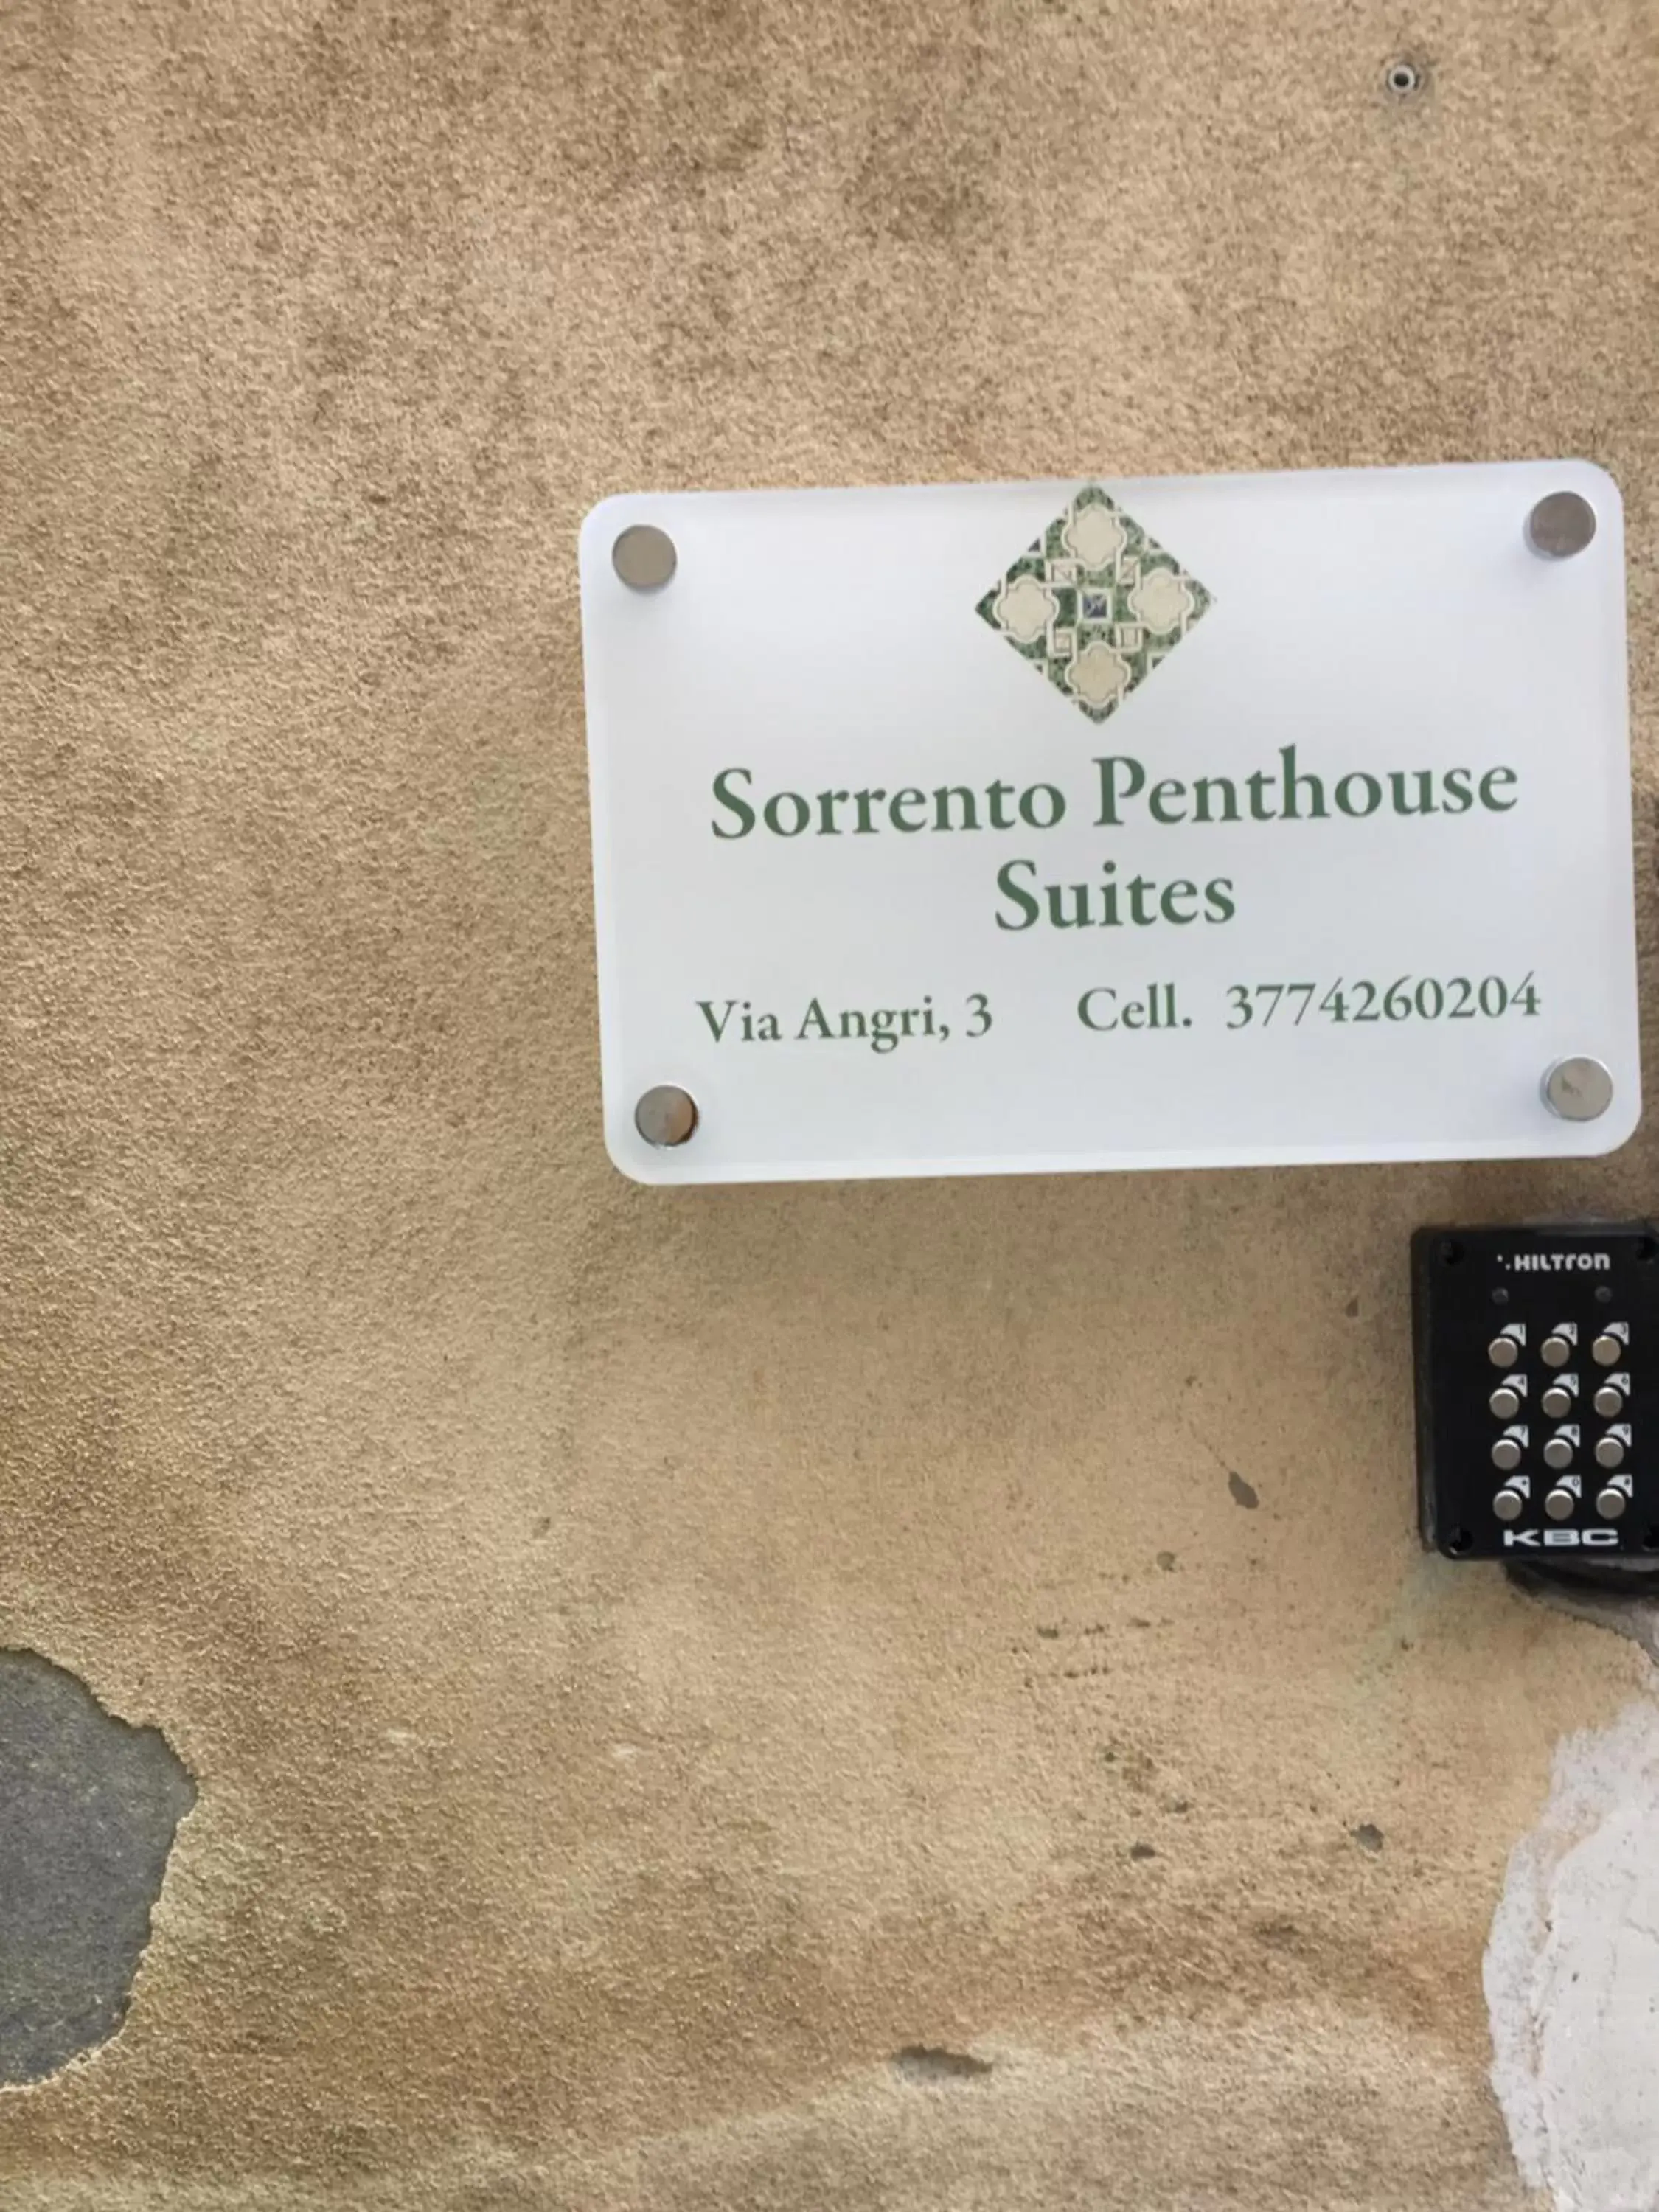 Property logo or sign in Sorrento Penthouse Suites